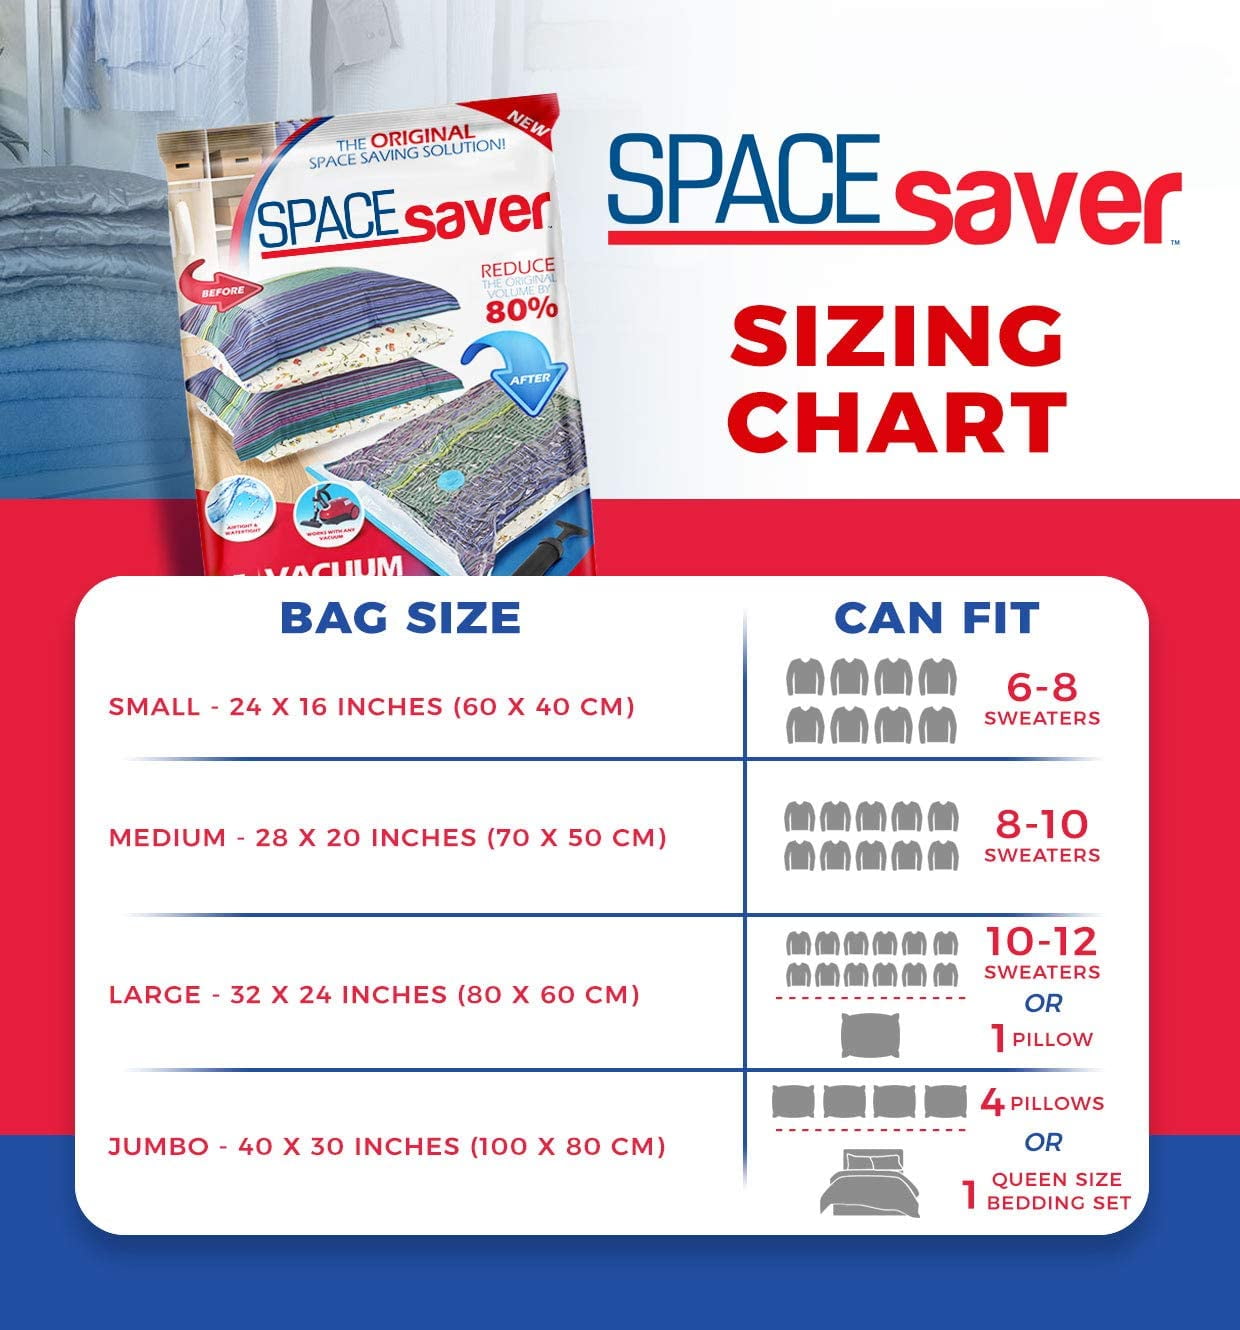 Spacesaver Premium *Jumbo* Vacuum Storage Bags (Works with Any Vacuum  Cleaner + Free Hand-Pump for Travel!) Double-Zip Seal and Triple Seal  Turbo-Valve for 80% More Compression! 